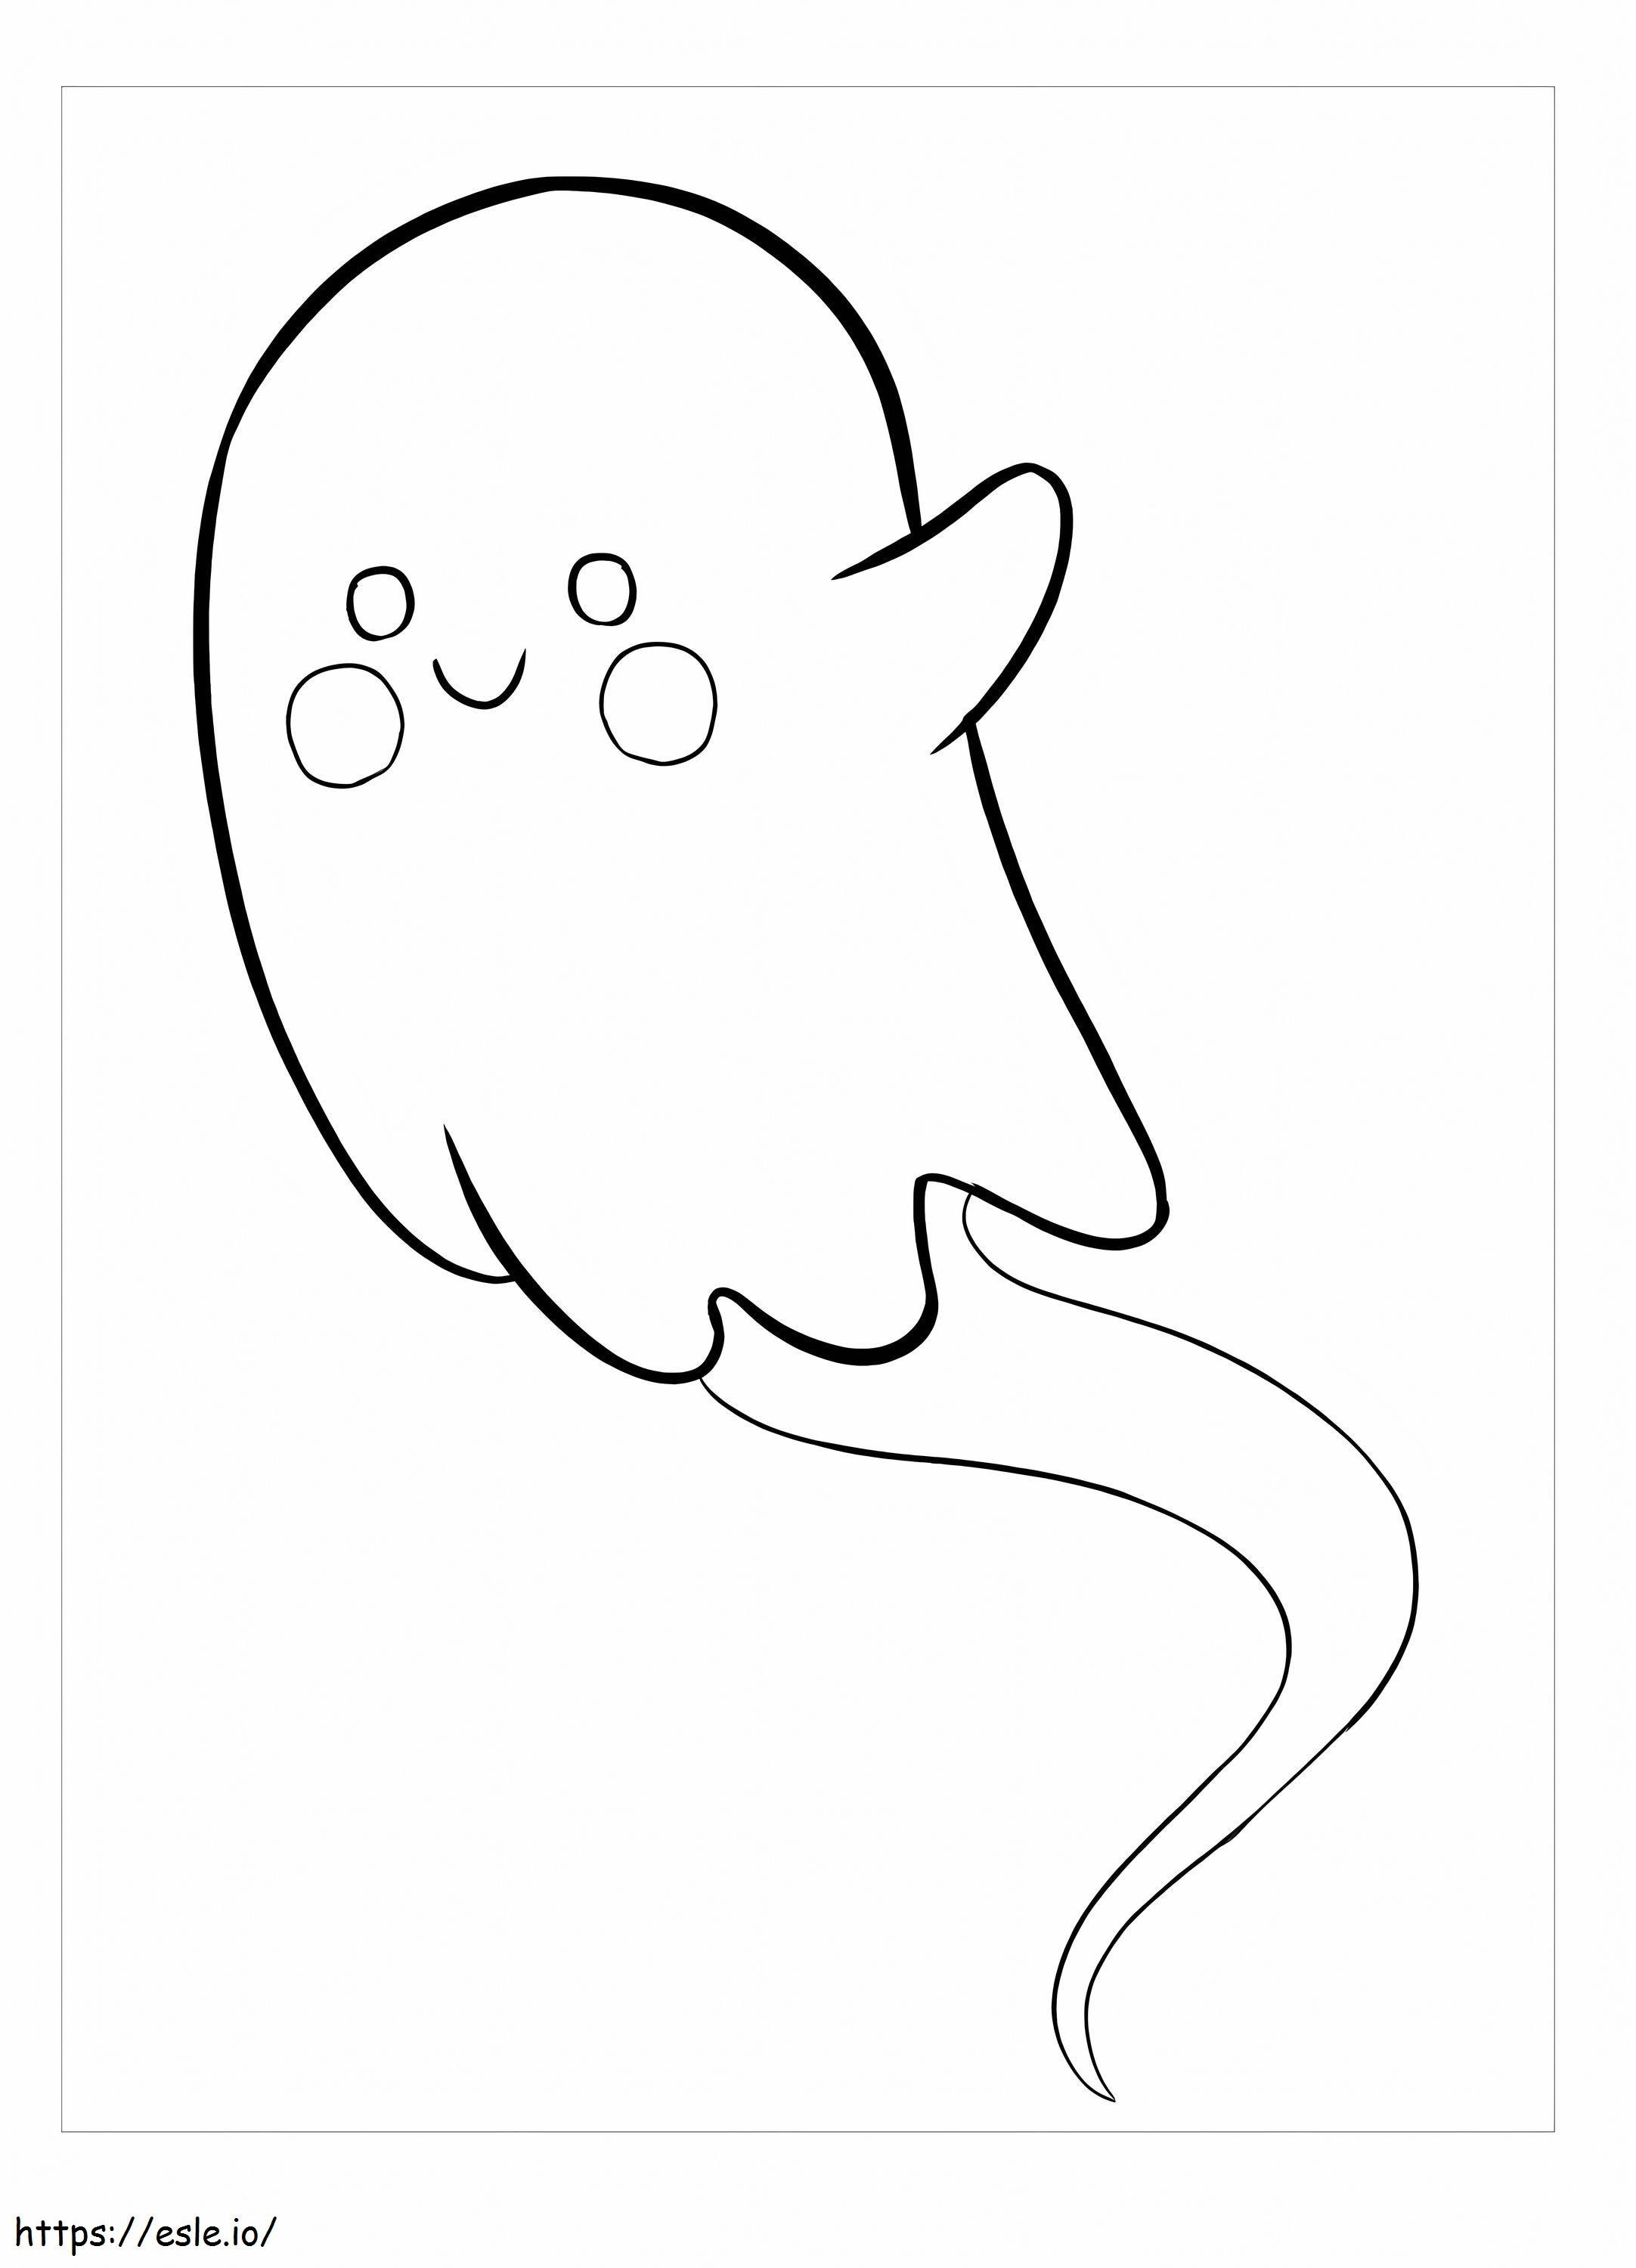 Cute Ghost Flying coloring page